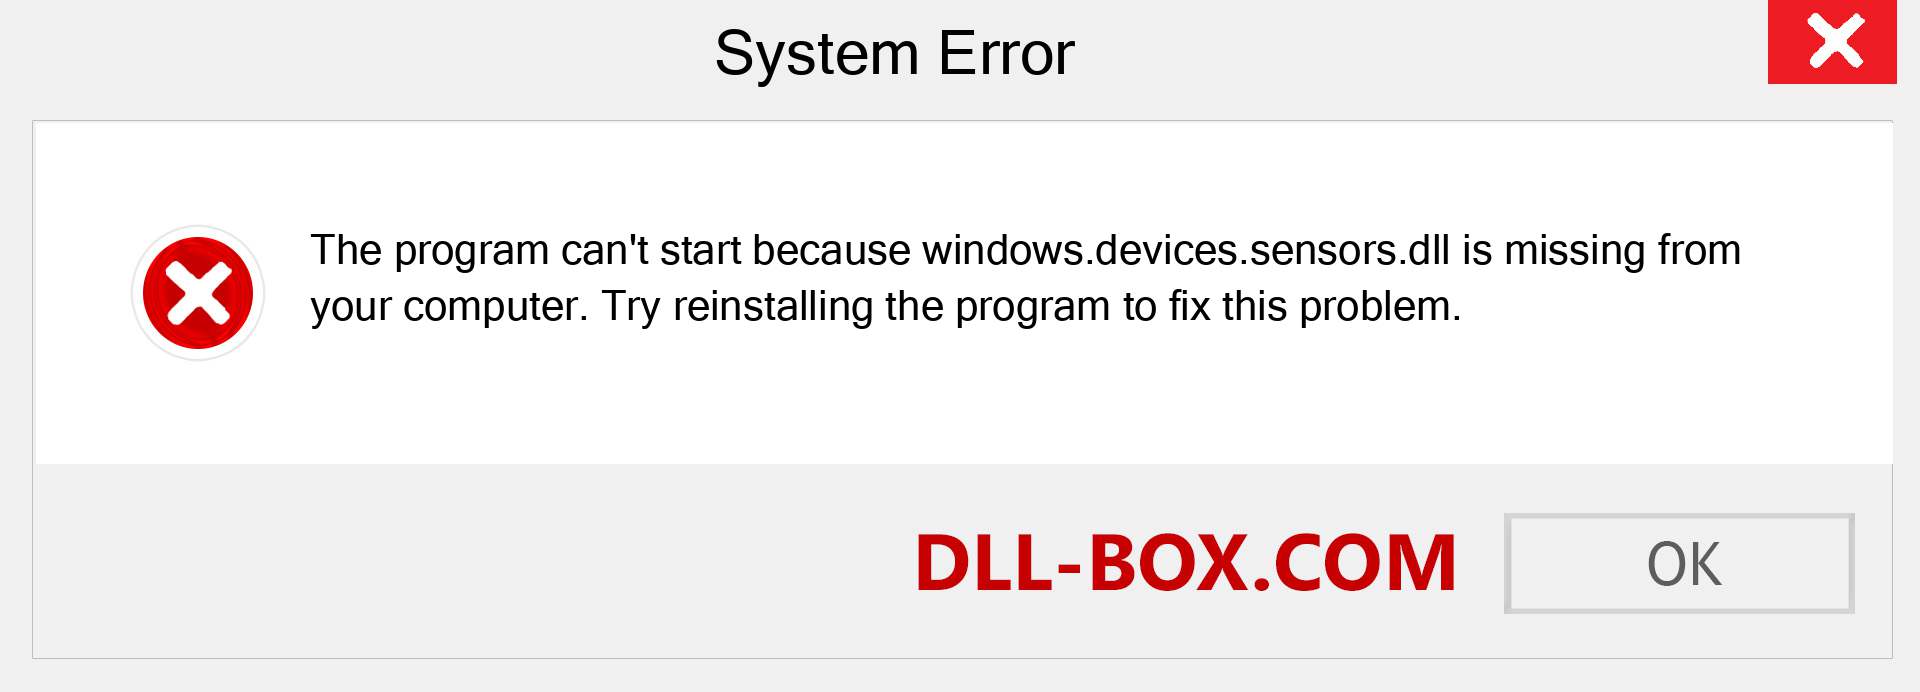  windows.devices.sensors.dll file is missing?. Download for Windows 7, 8, 10 - Fix  windows.devices.sensors dll Missing Error on Windows, photos, images